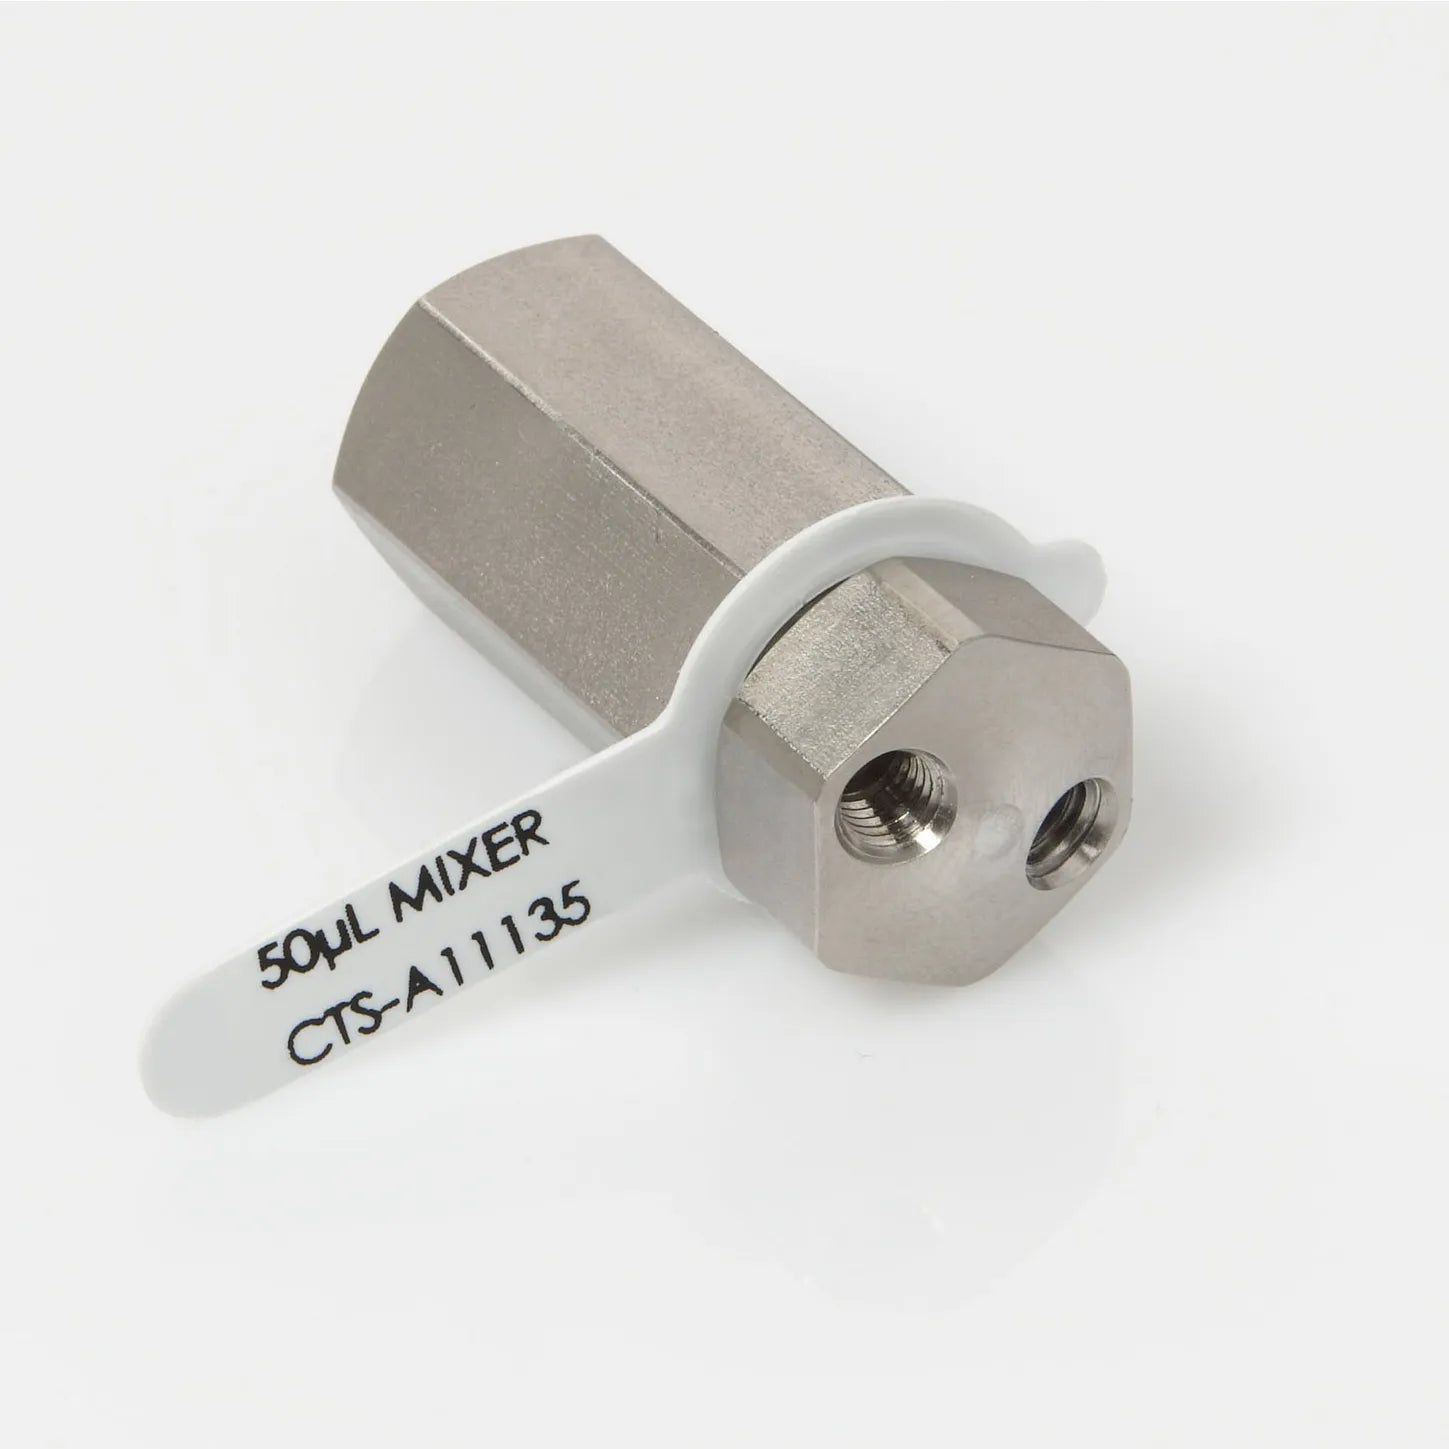 50µL Standard Zirconia Mixer, Comparable to Waters # 700002911